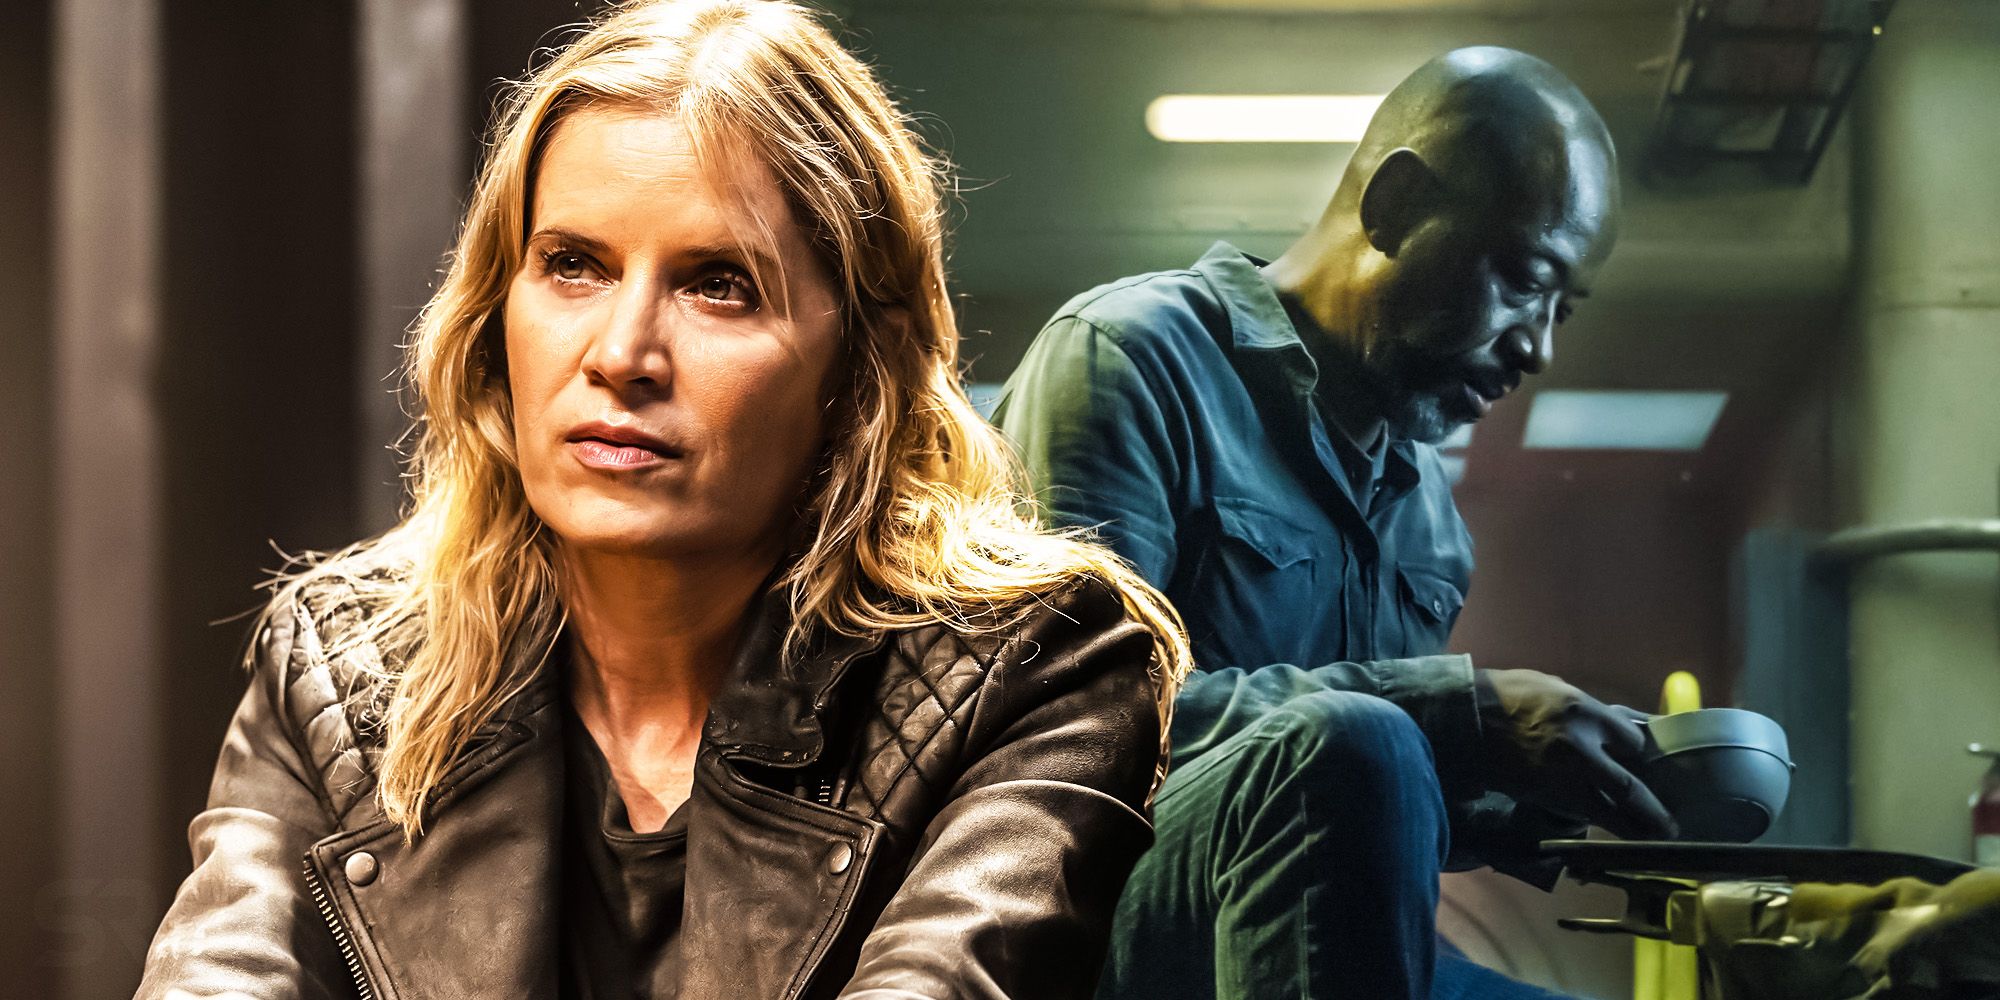 Fear the walking dead Just Set Up How Madison Returns